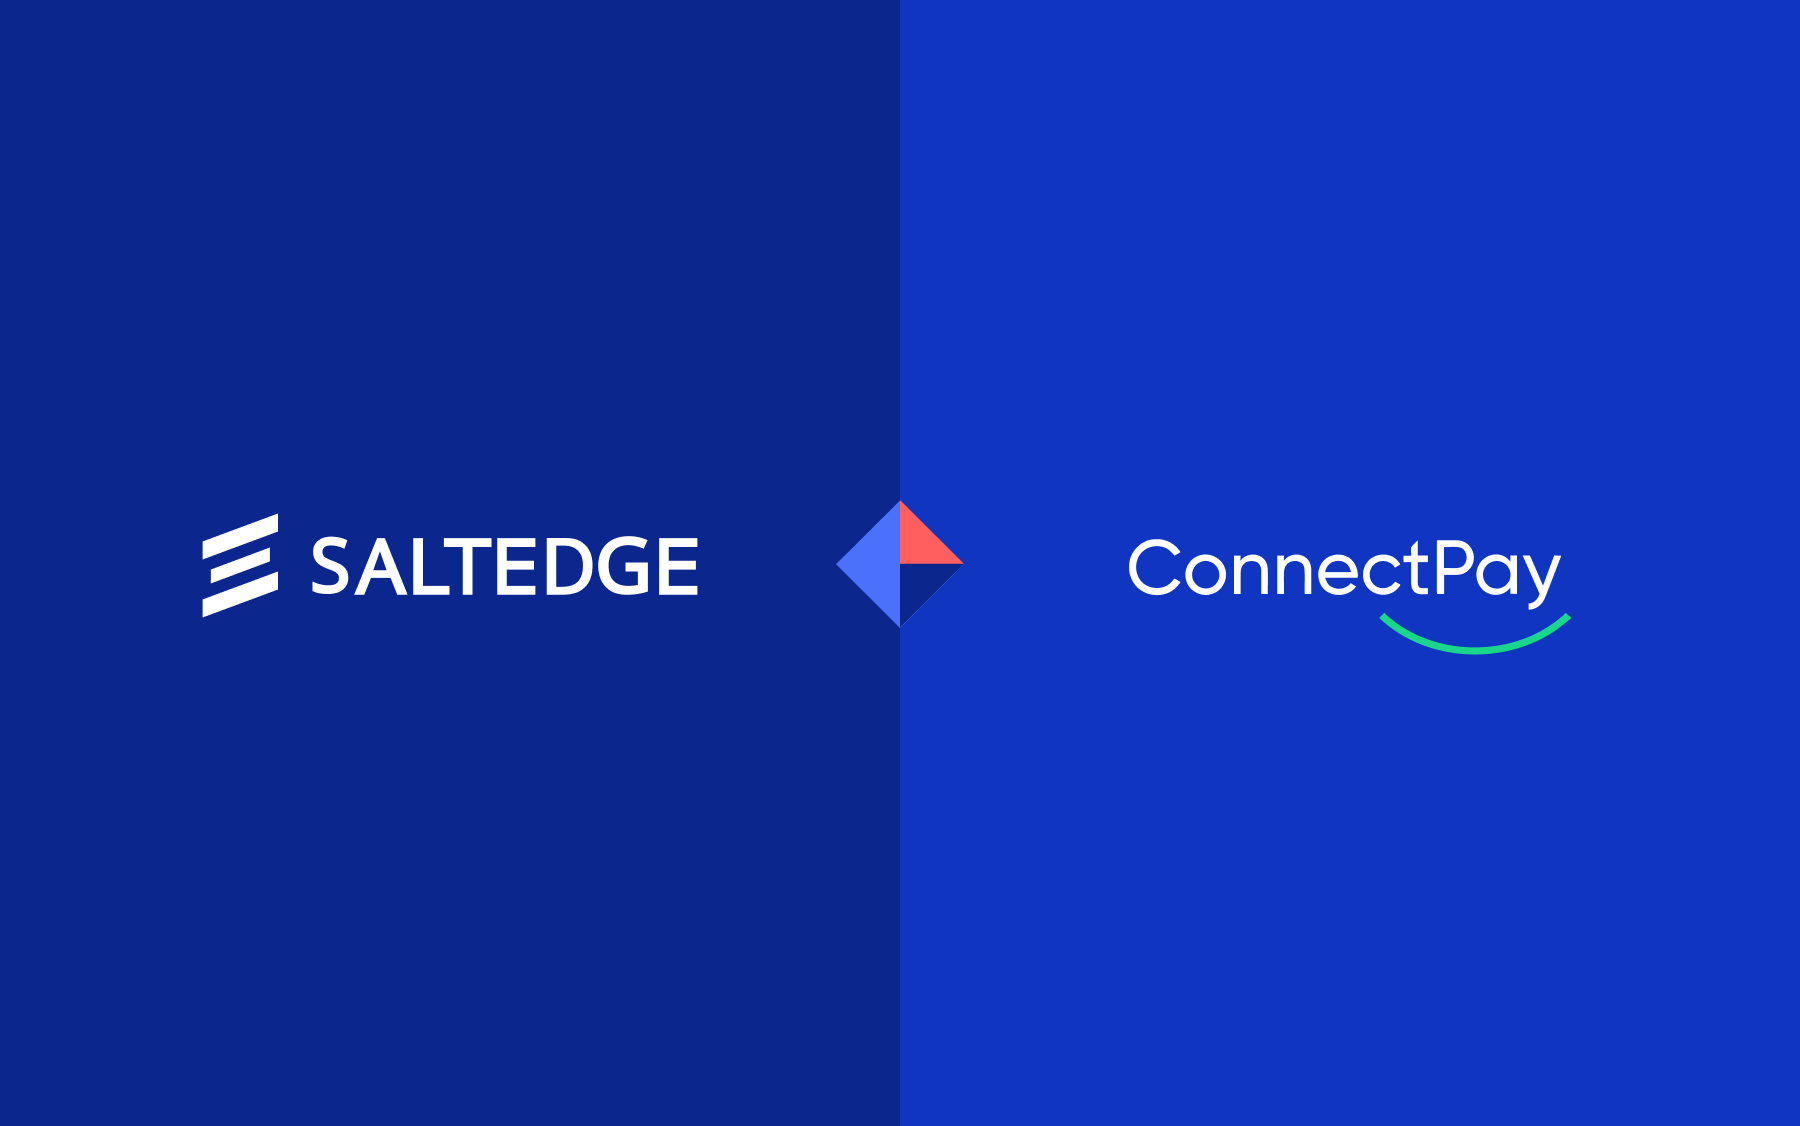 ConnectPay Partners with Salt Edge to Offer a Smooth Open Banking Payments Experience